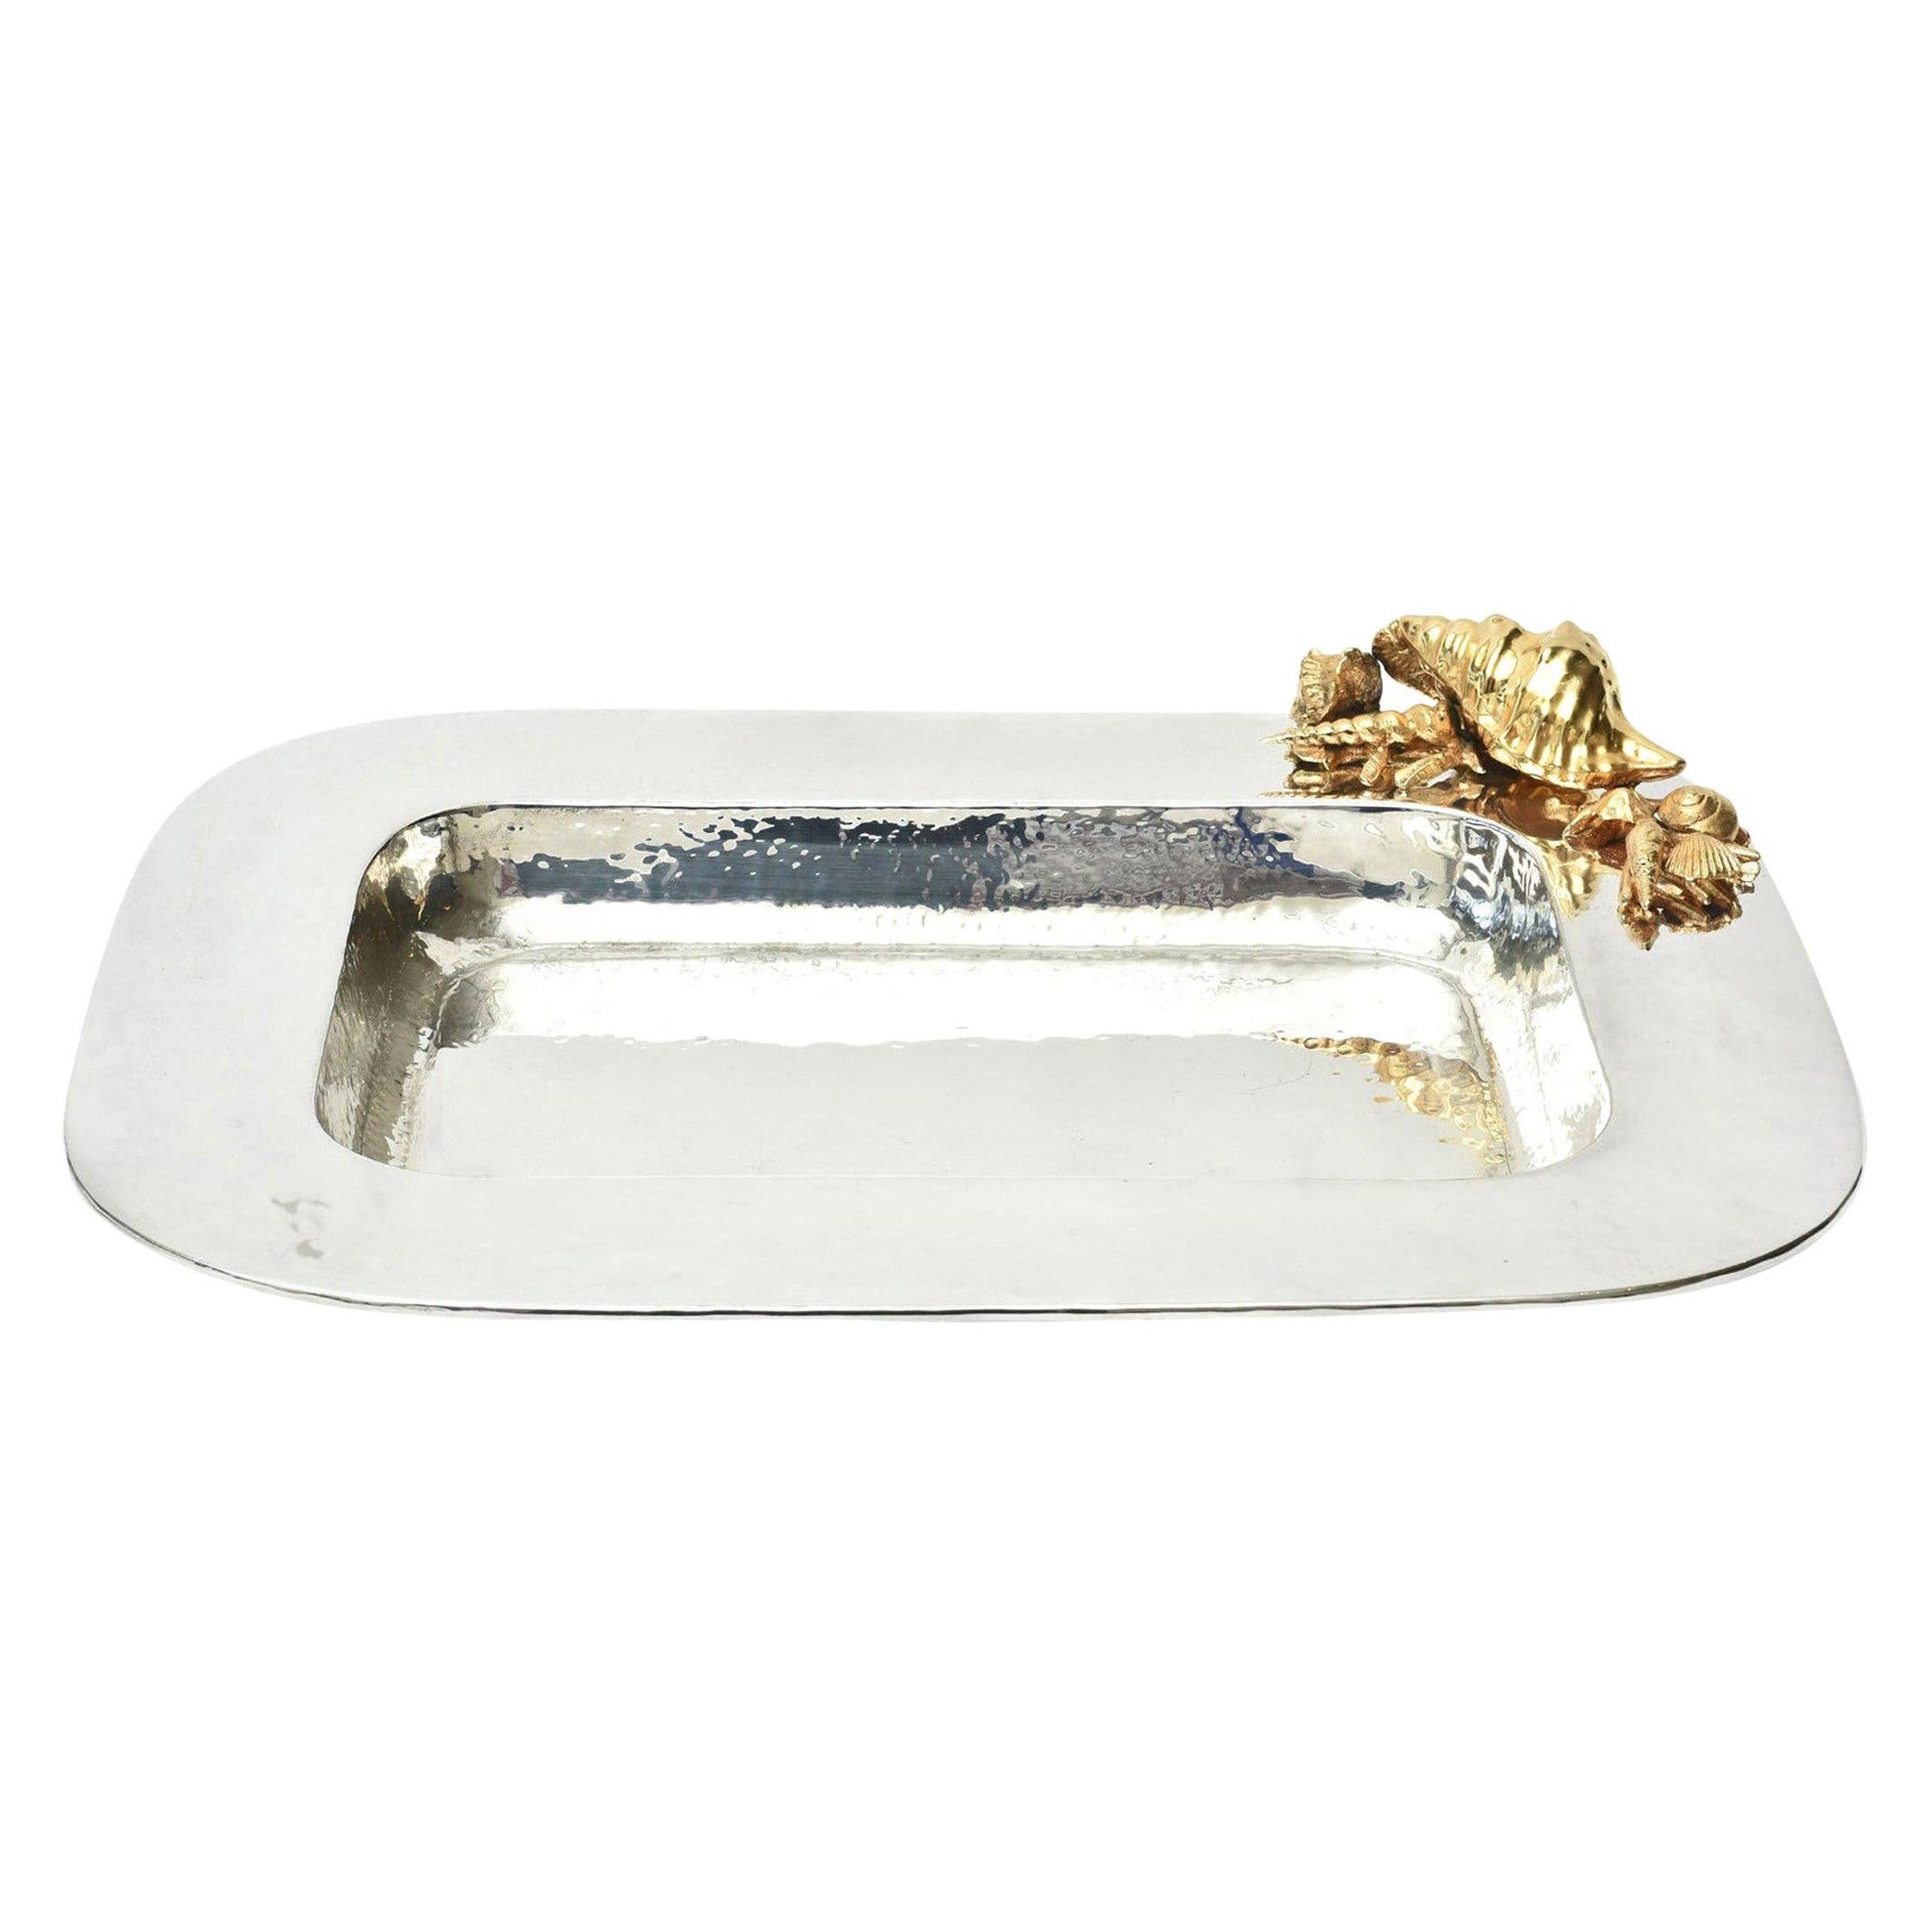 Hand-Hammered Silver-Plate and 24-Carat Gold-Plated Sea Shell Tray Signed